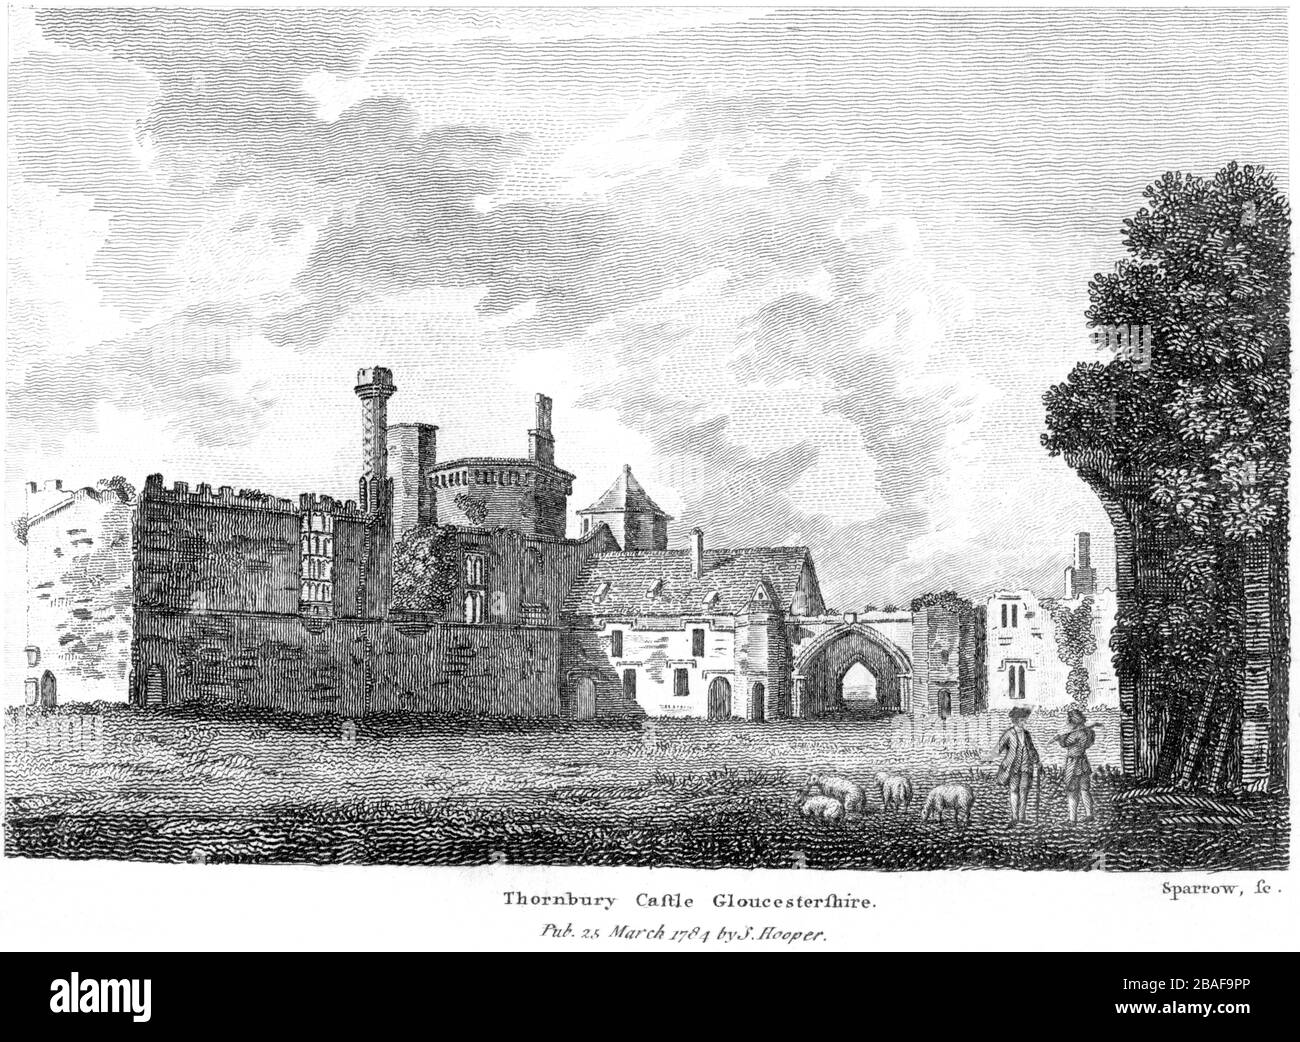 An engraving of Thornbury Castle Gloucestershire 1784 scanned at high resolution from a book published around 1786. Believed copyright free. Stock Photo